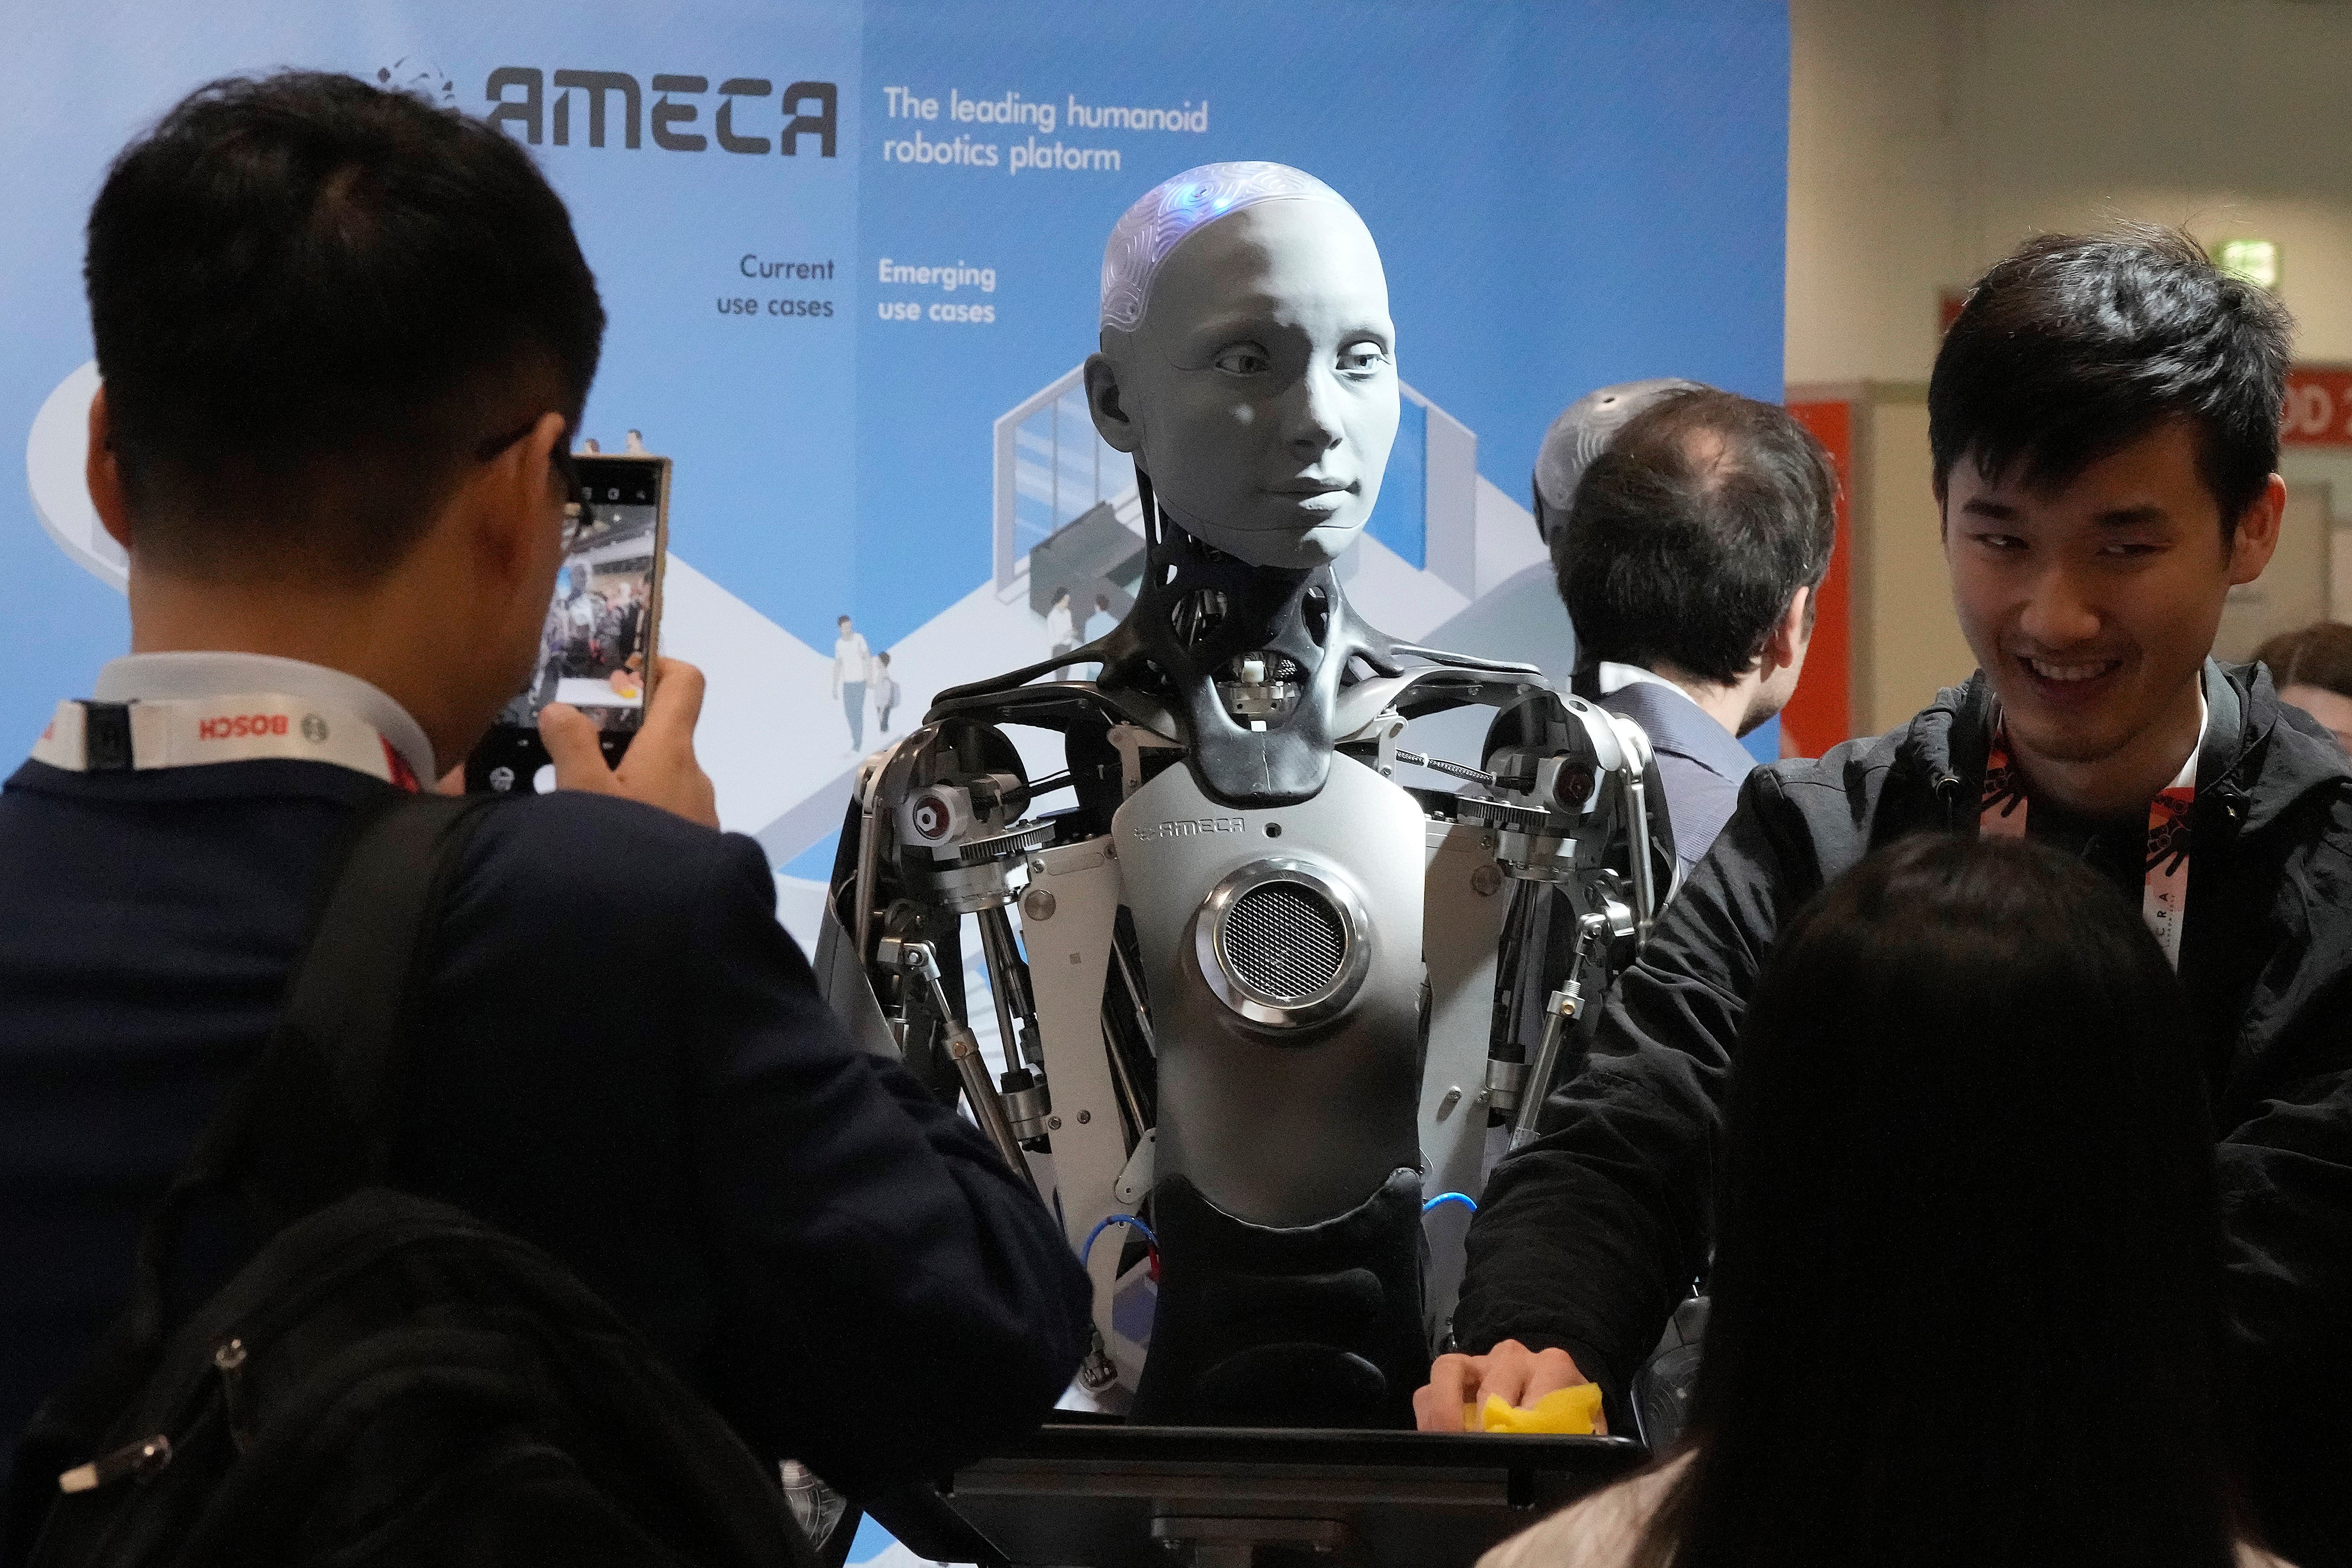 A robot designed by Engineers Arts and called Ameca, interacts with visitors during the International Conference on Robotics and Automation ICRA (Frank Augstein/AP)